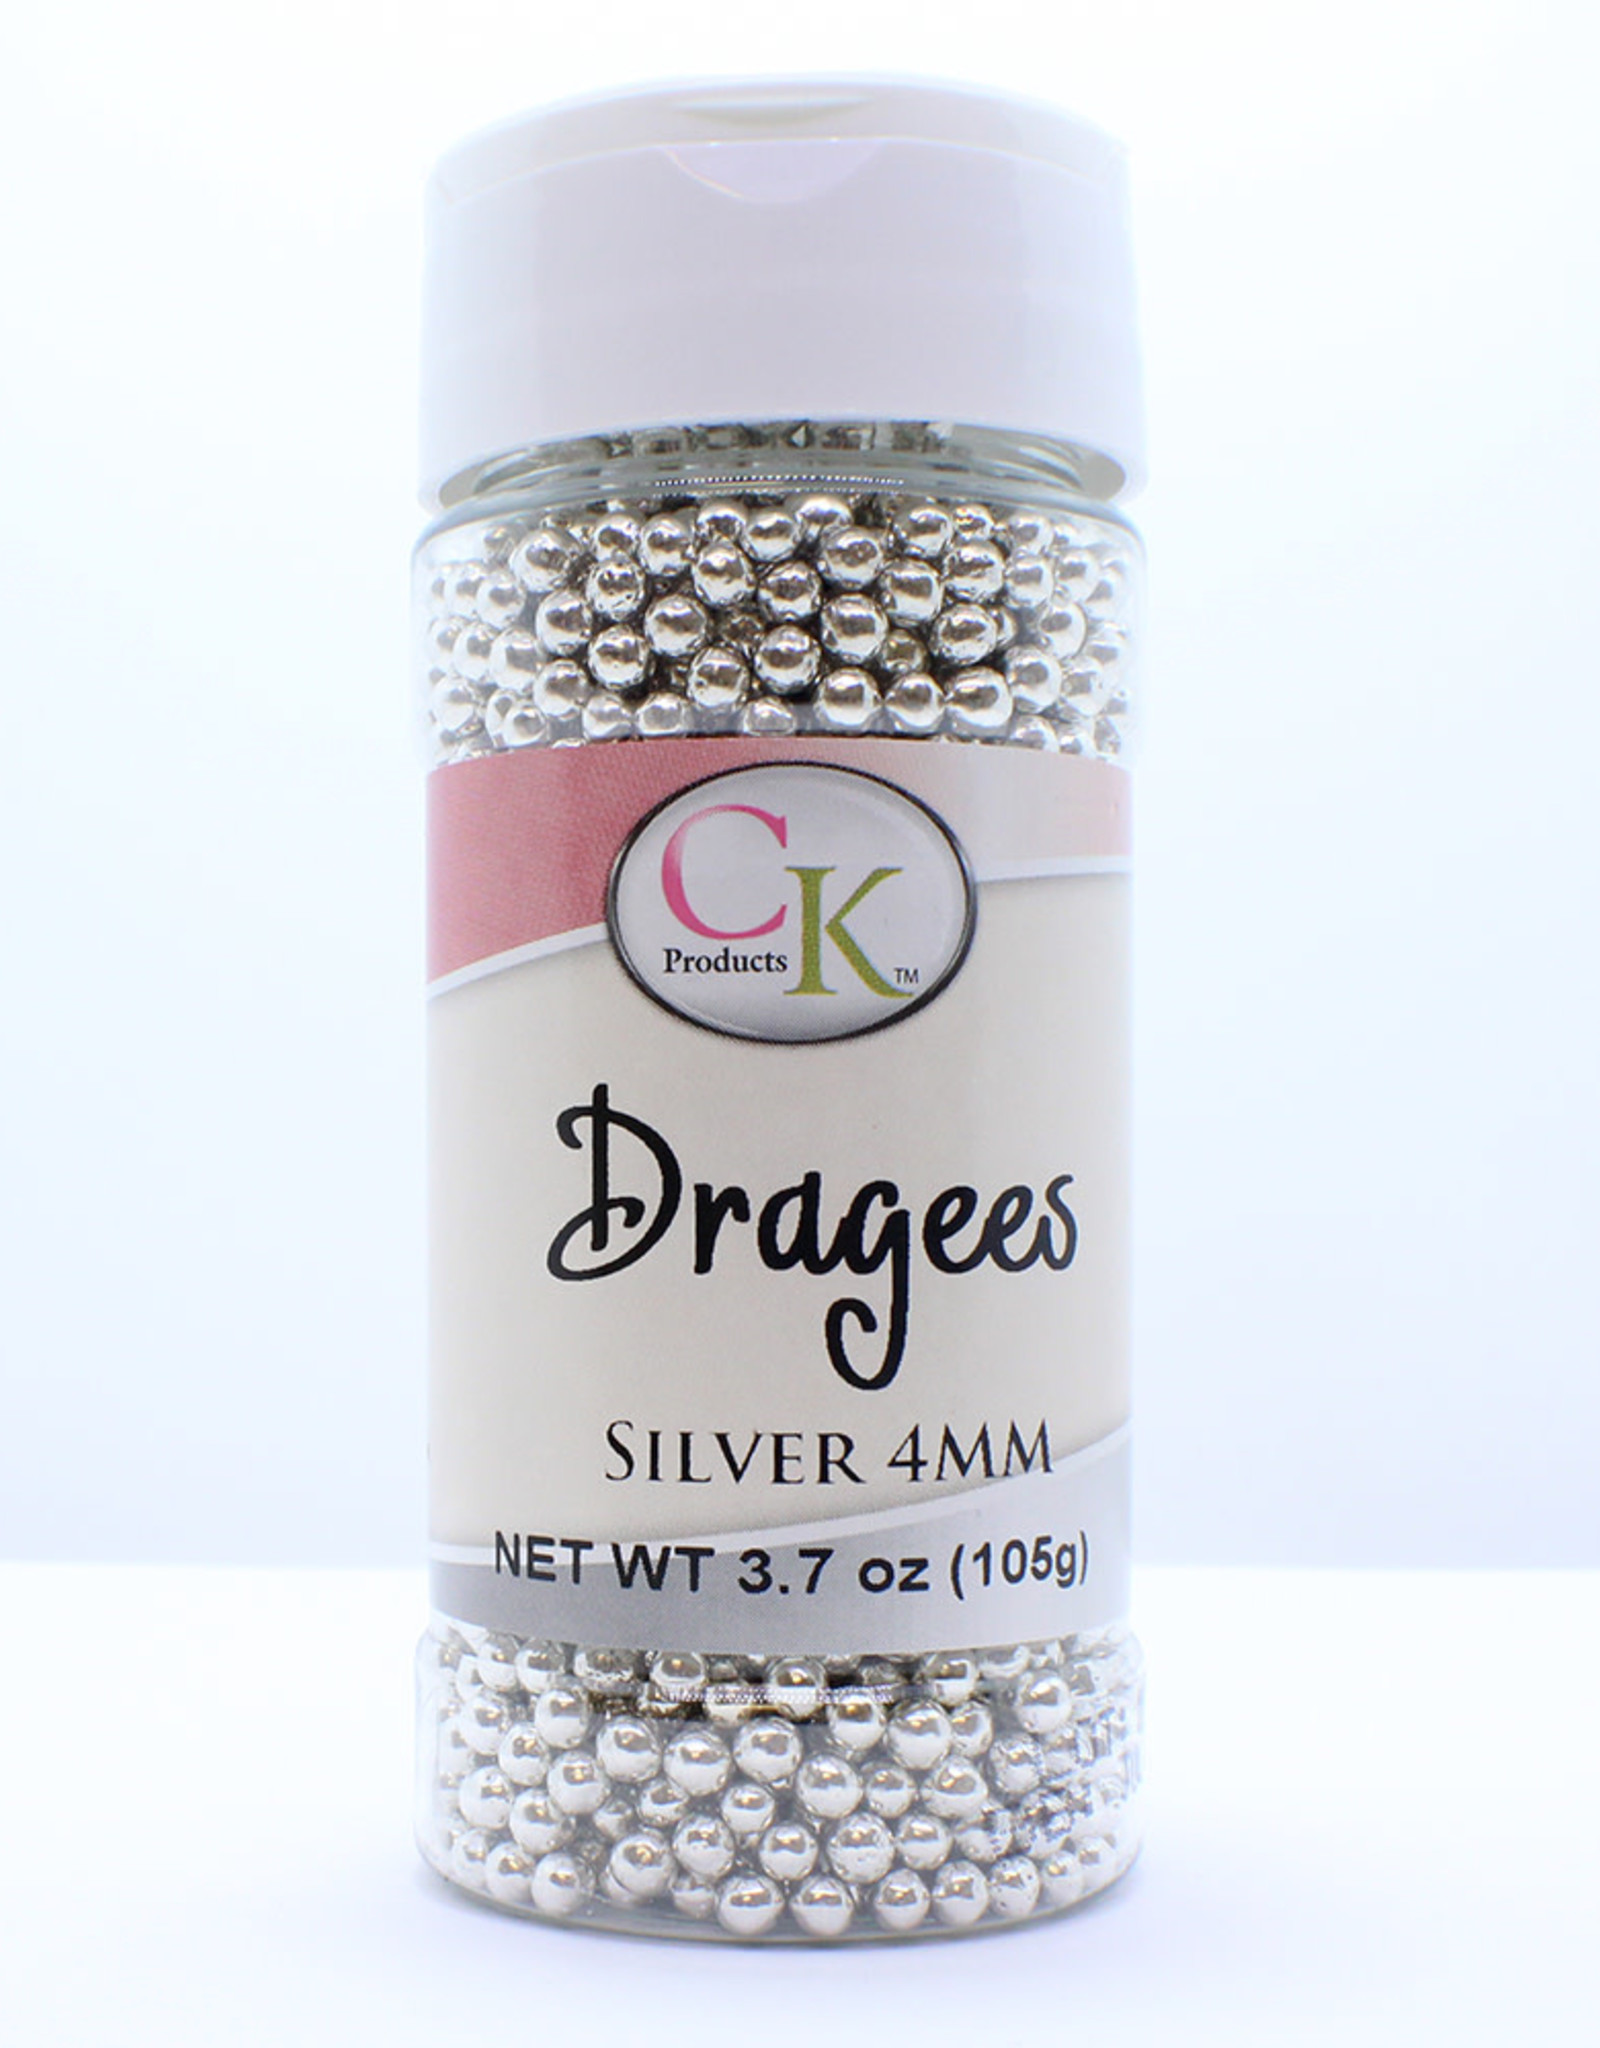 Silver 4mm Dragees (3.75oz.)